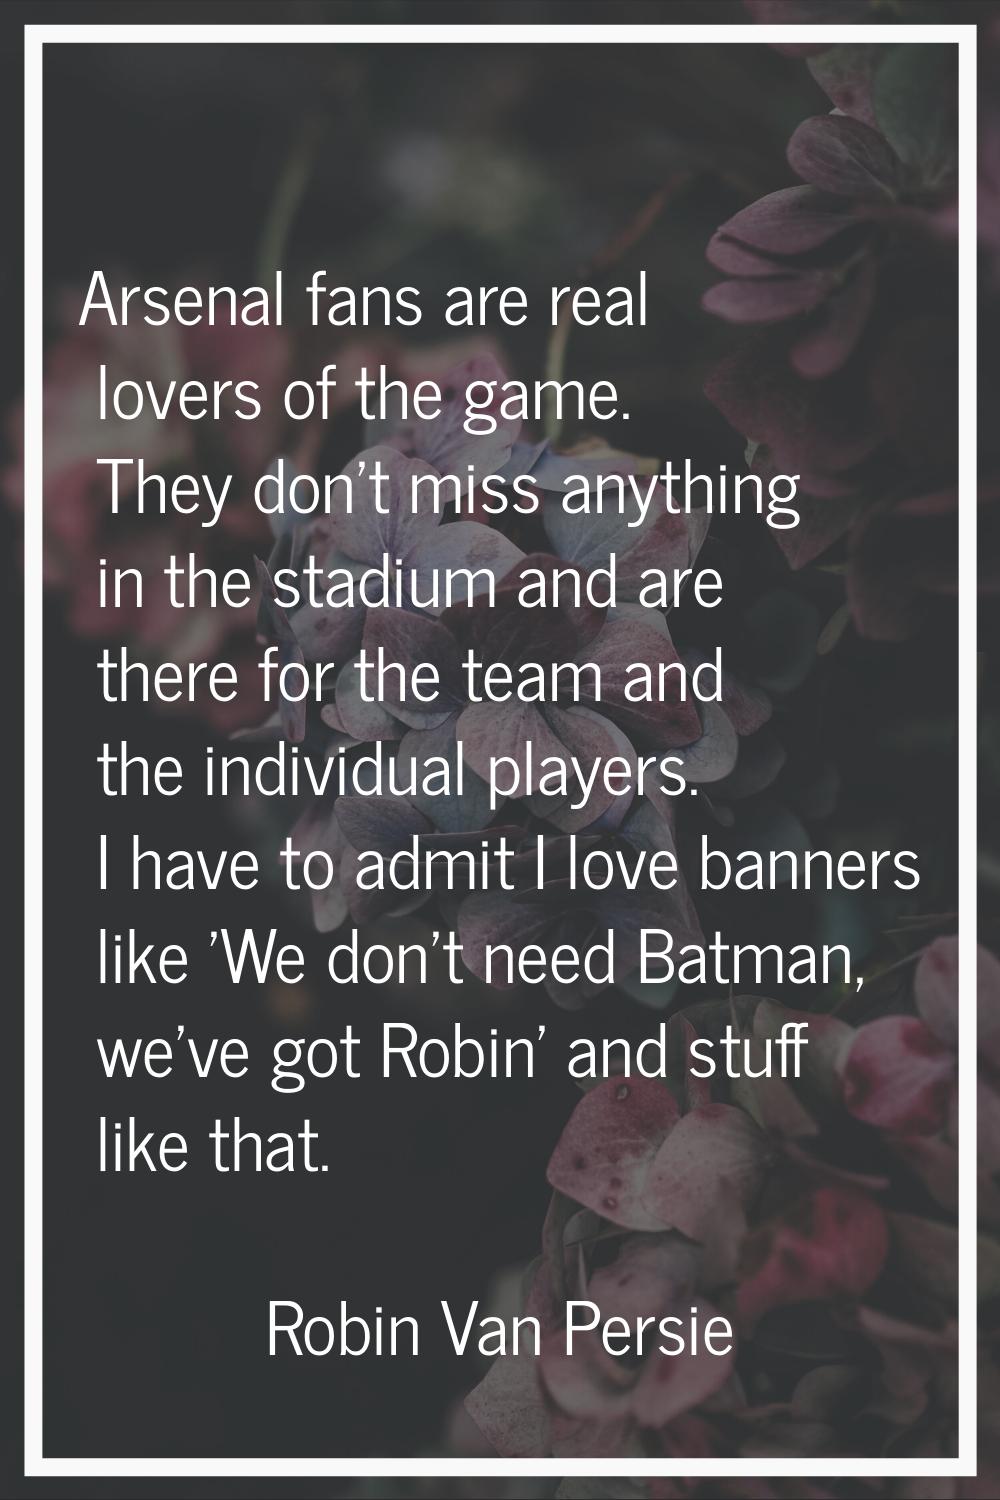 Arsenal fans are real lovers of the game. They don't miss anything in the stadium and are there for